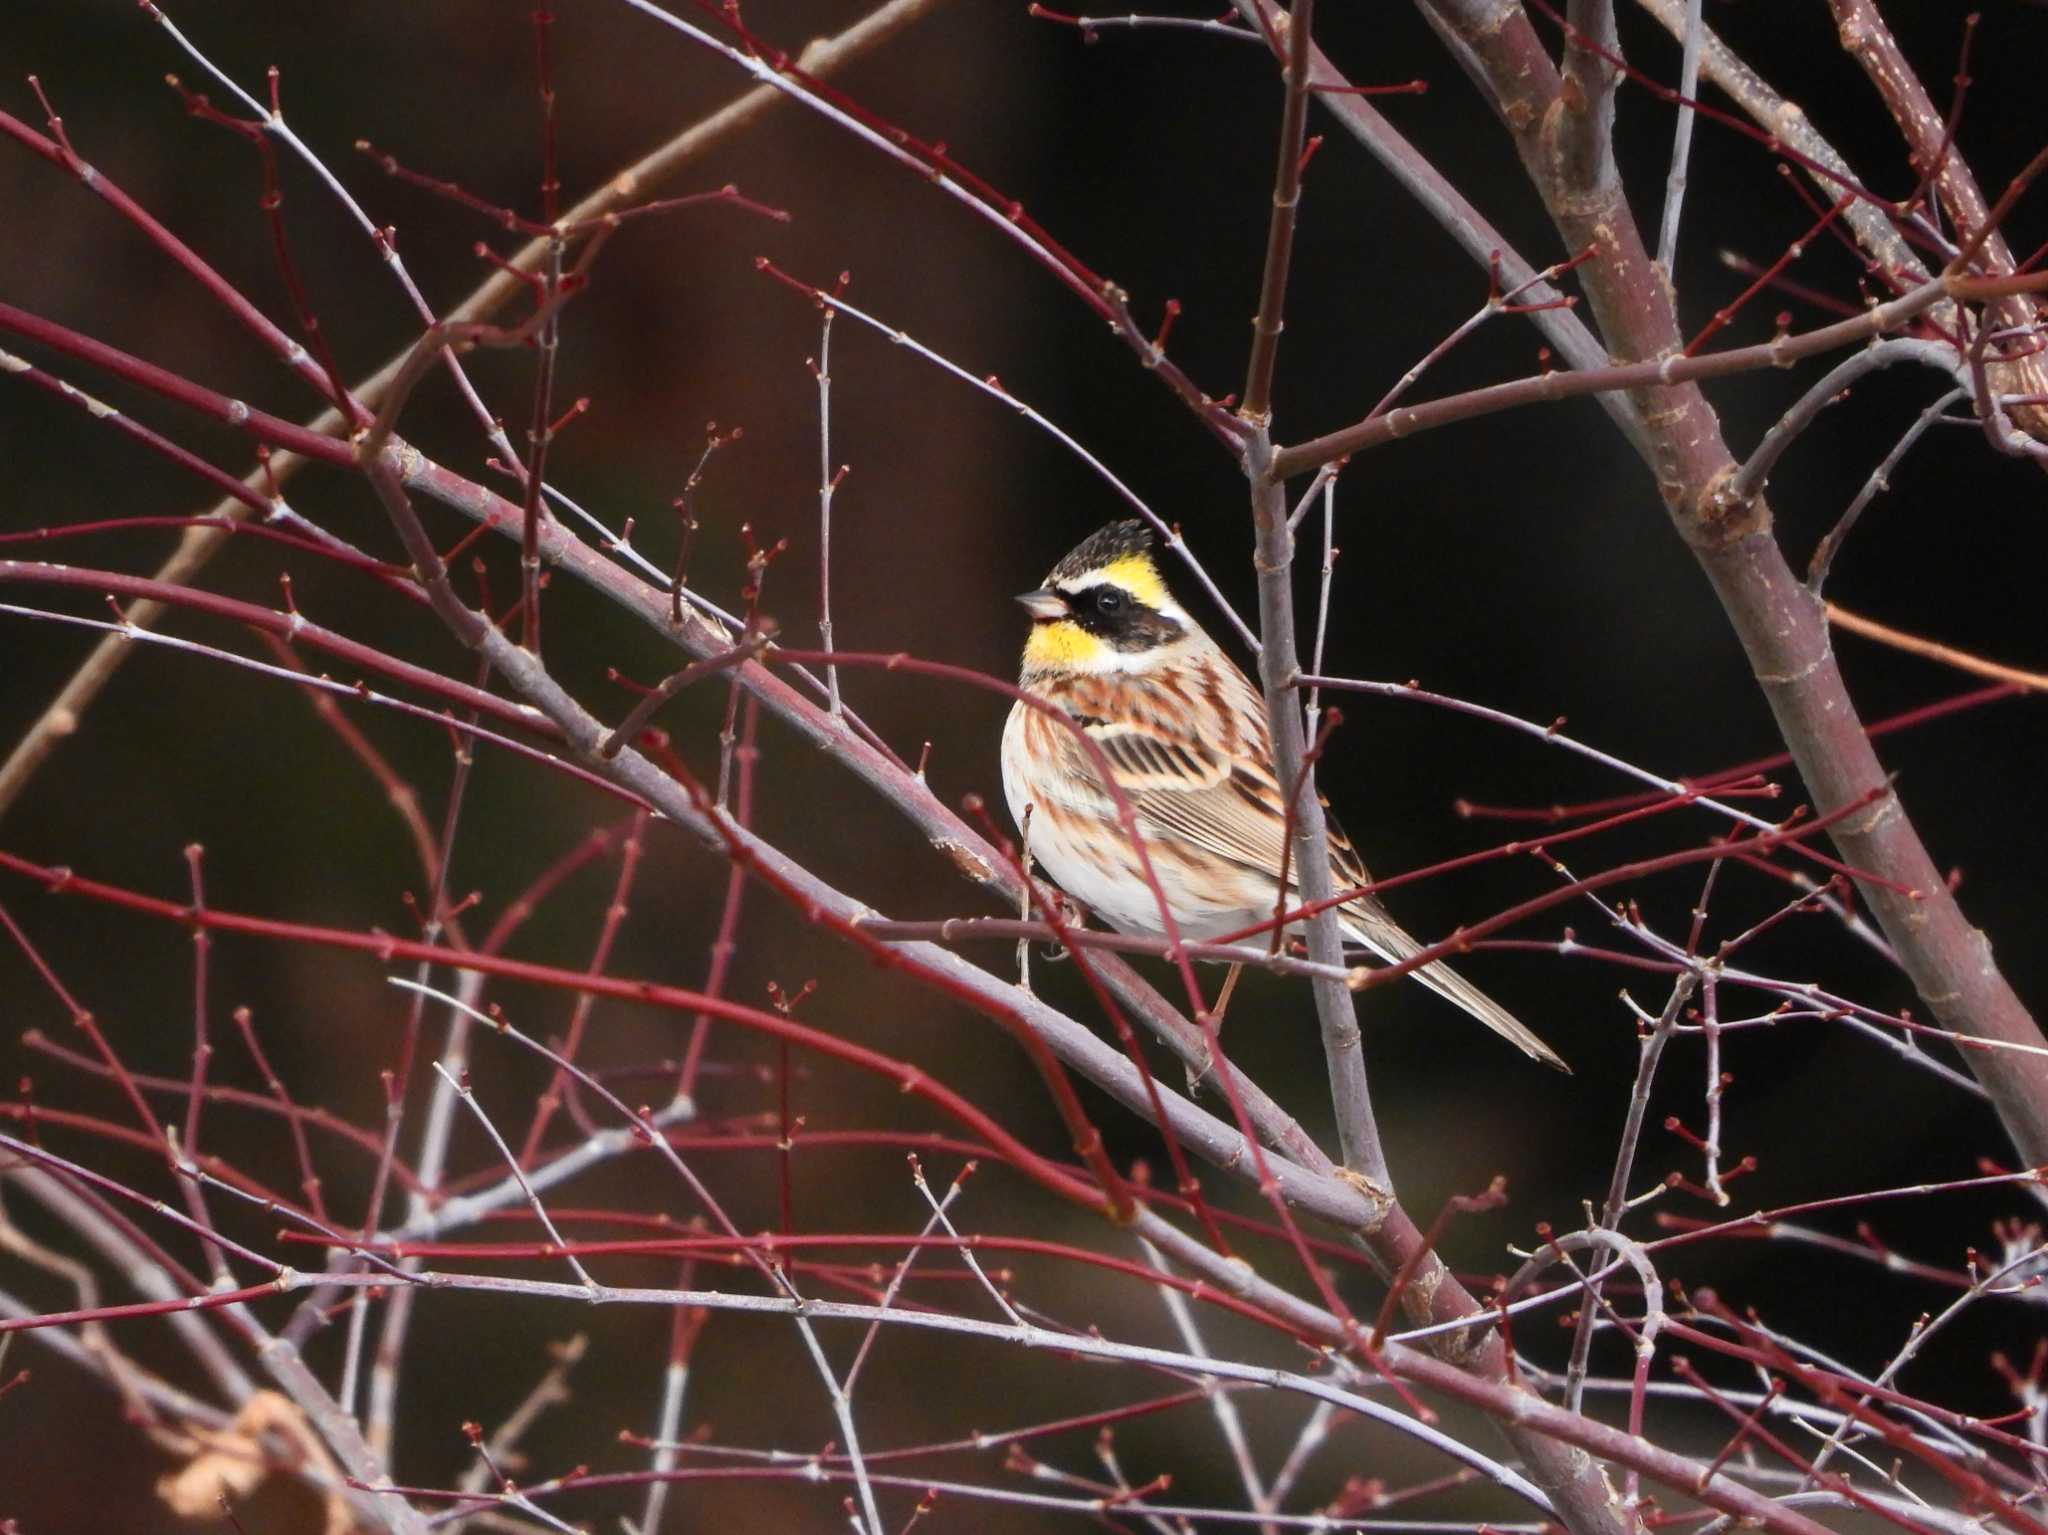 Photo of Yellow-throated Bunting at 猿ヶ京温泉 by 𝕲𝖗𝖊𝖞 𝕳𝖊𝖗𝖔𝖓